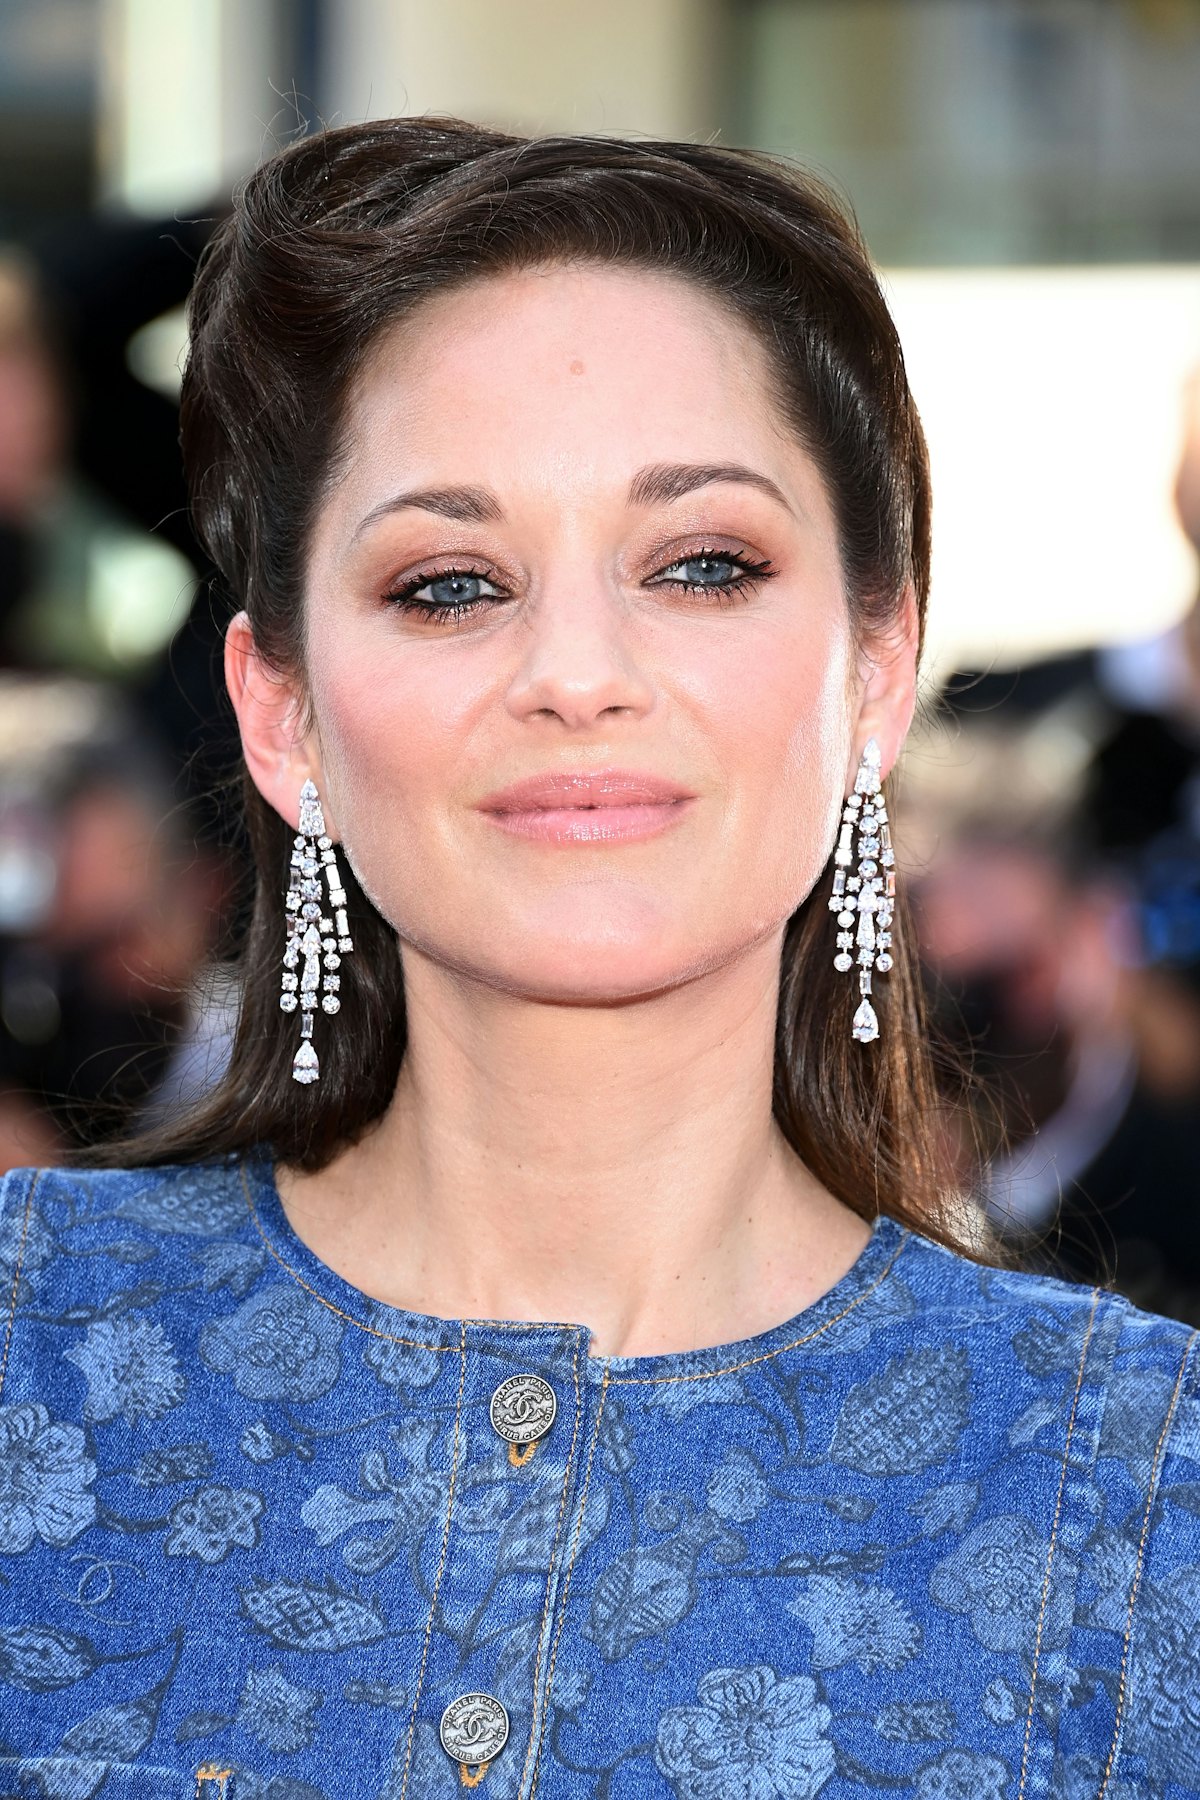 CANNES, FRANCE - JULY 10: Marion Cotillard attends the "De Son Vivant (Peaceful)" screening during the 74th annual Cannes Film Festival on July 10, 2021 in Cannes, France. (Photo by Daniele Venturelli/WireImage)